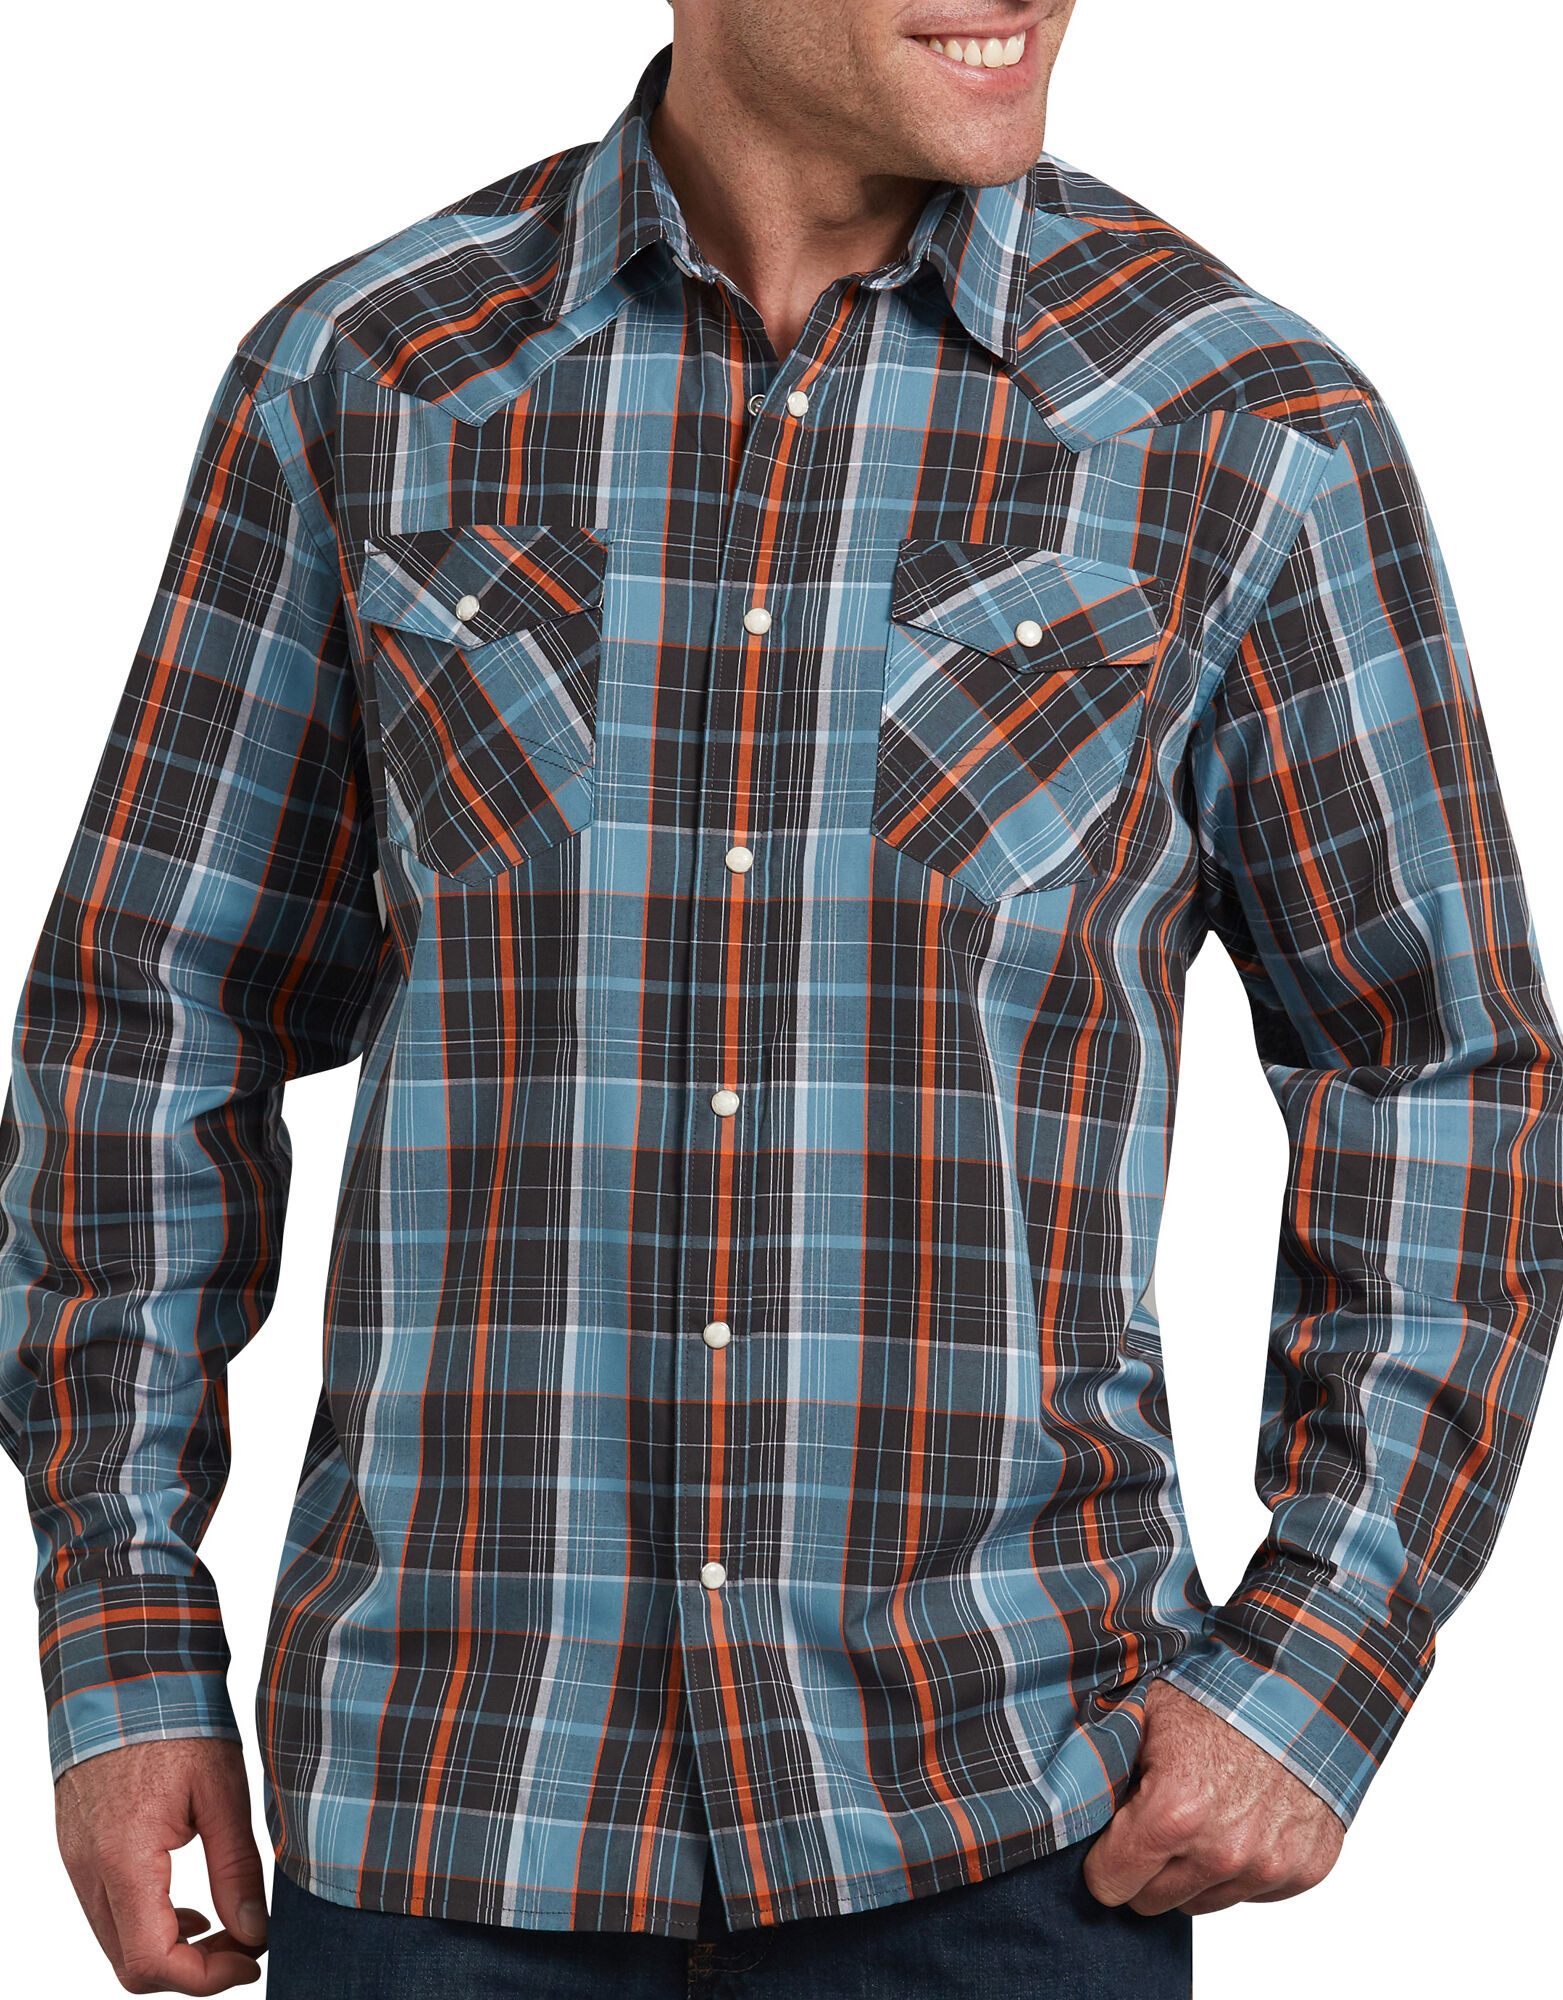 GRMO Men Loose Fit Casual Checkered Long Sleeve Western Button Down Shirt